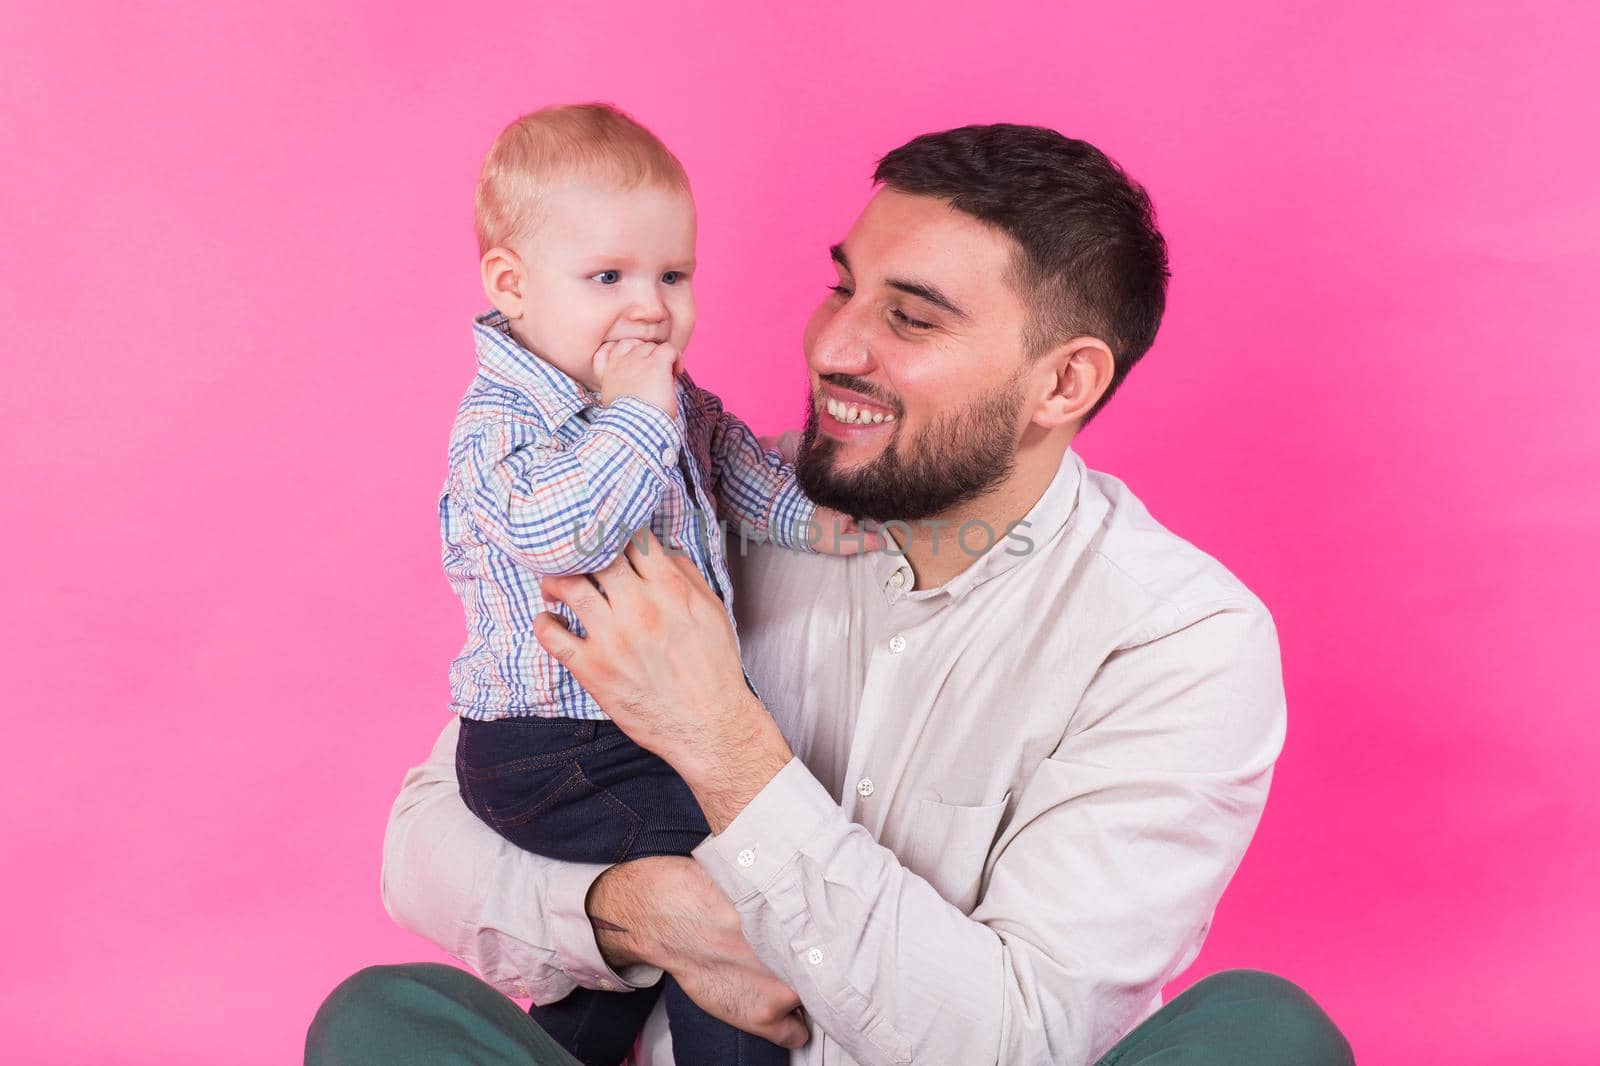 Happy portrait of the father and son on pink background. In studio by Satura86